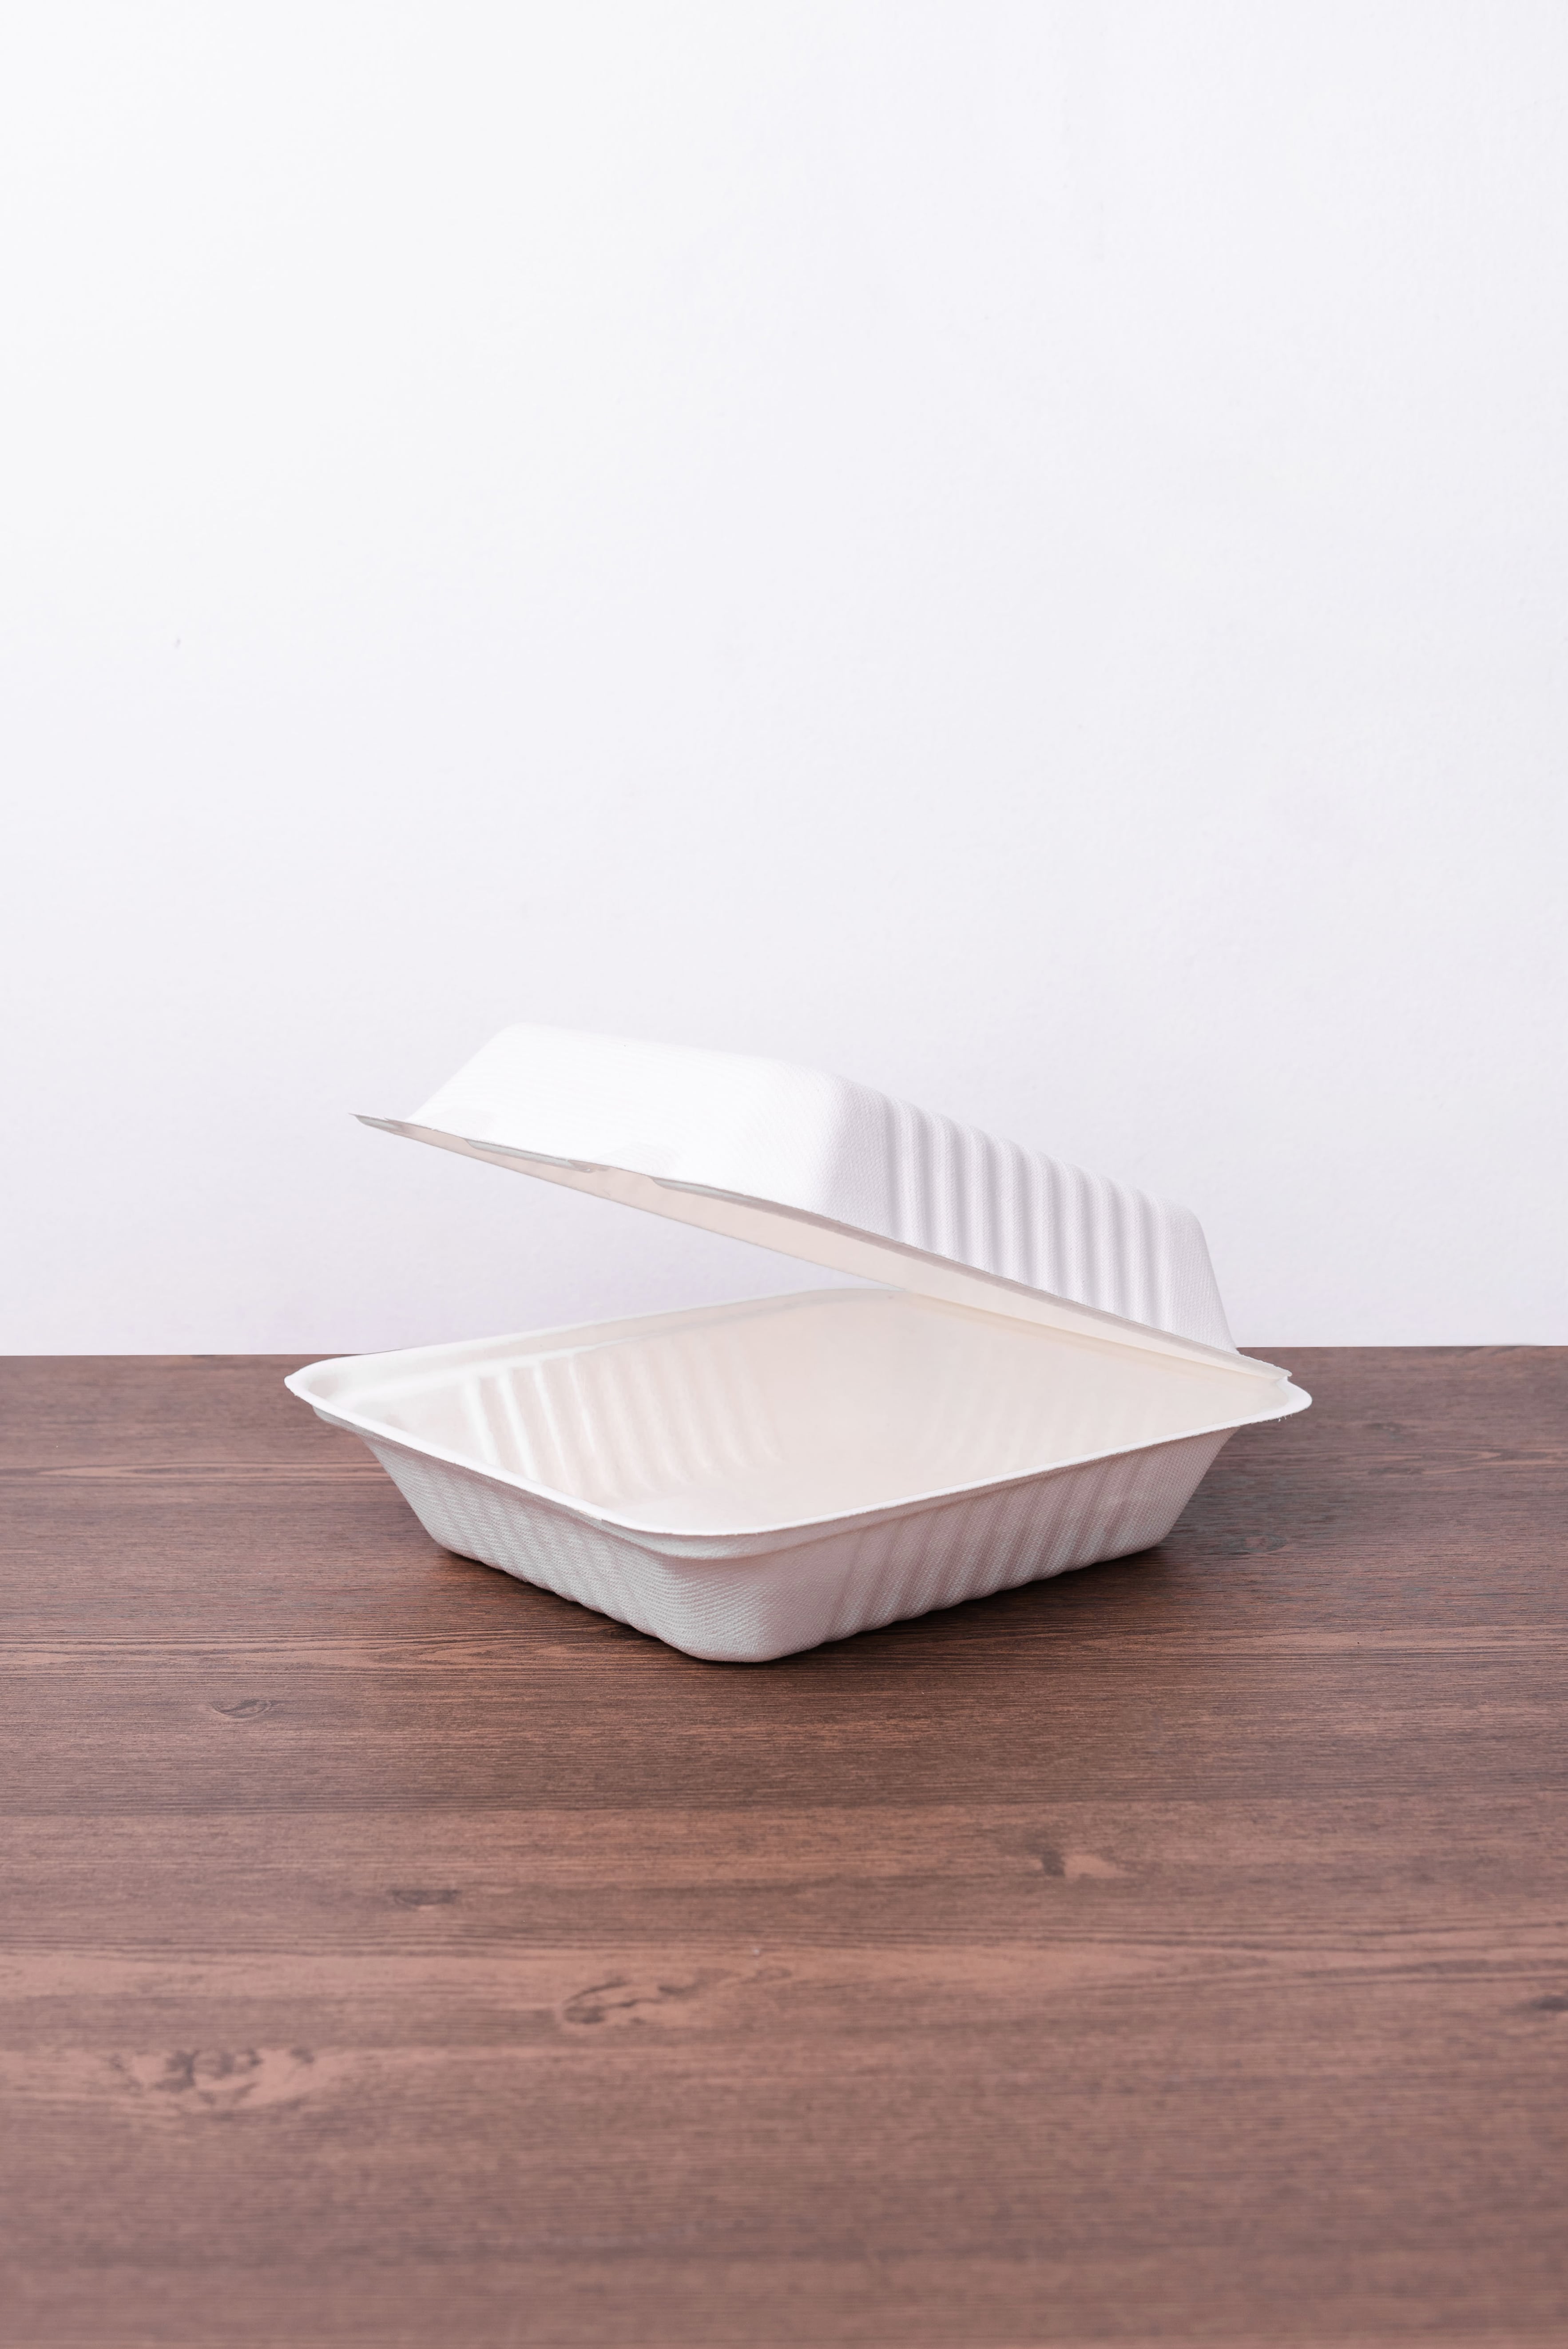 8x8 Compostable Clamshell - 200 count